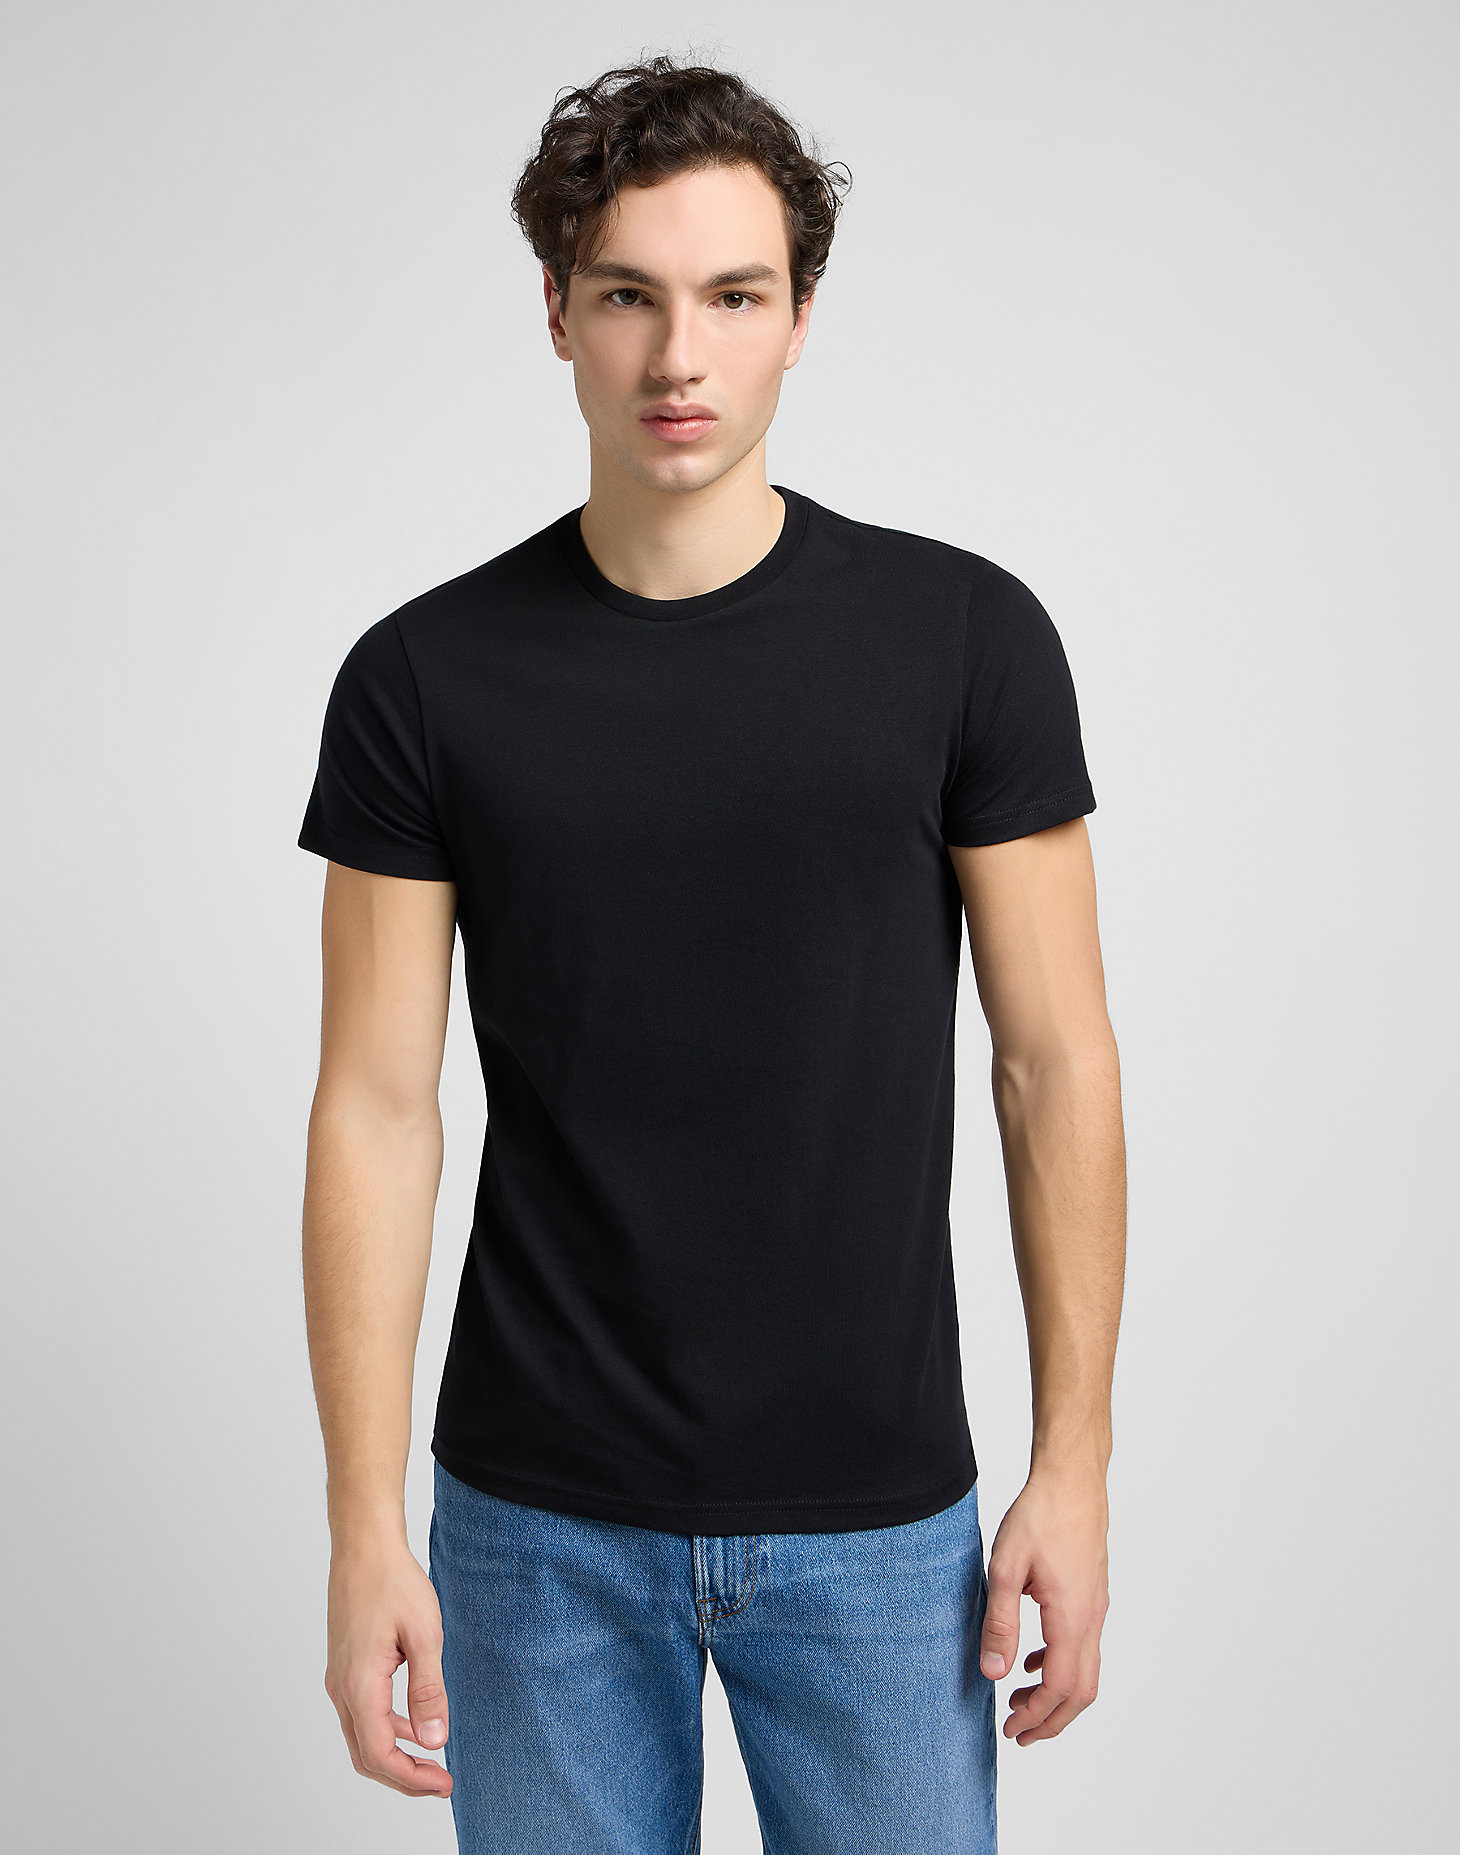 Twin Pack Crew Tee in Black main view